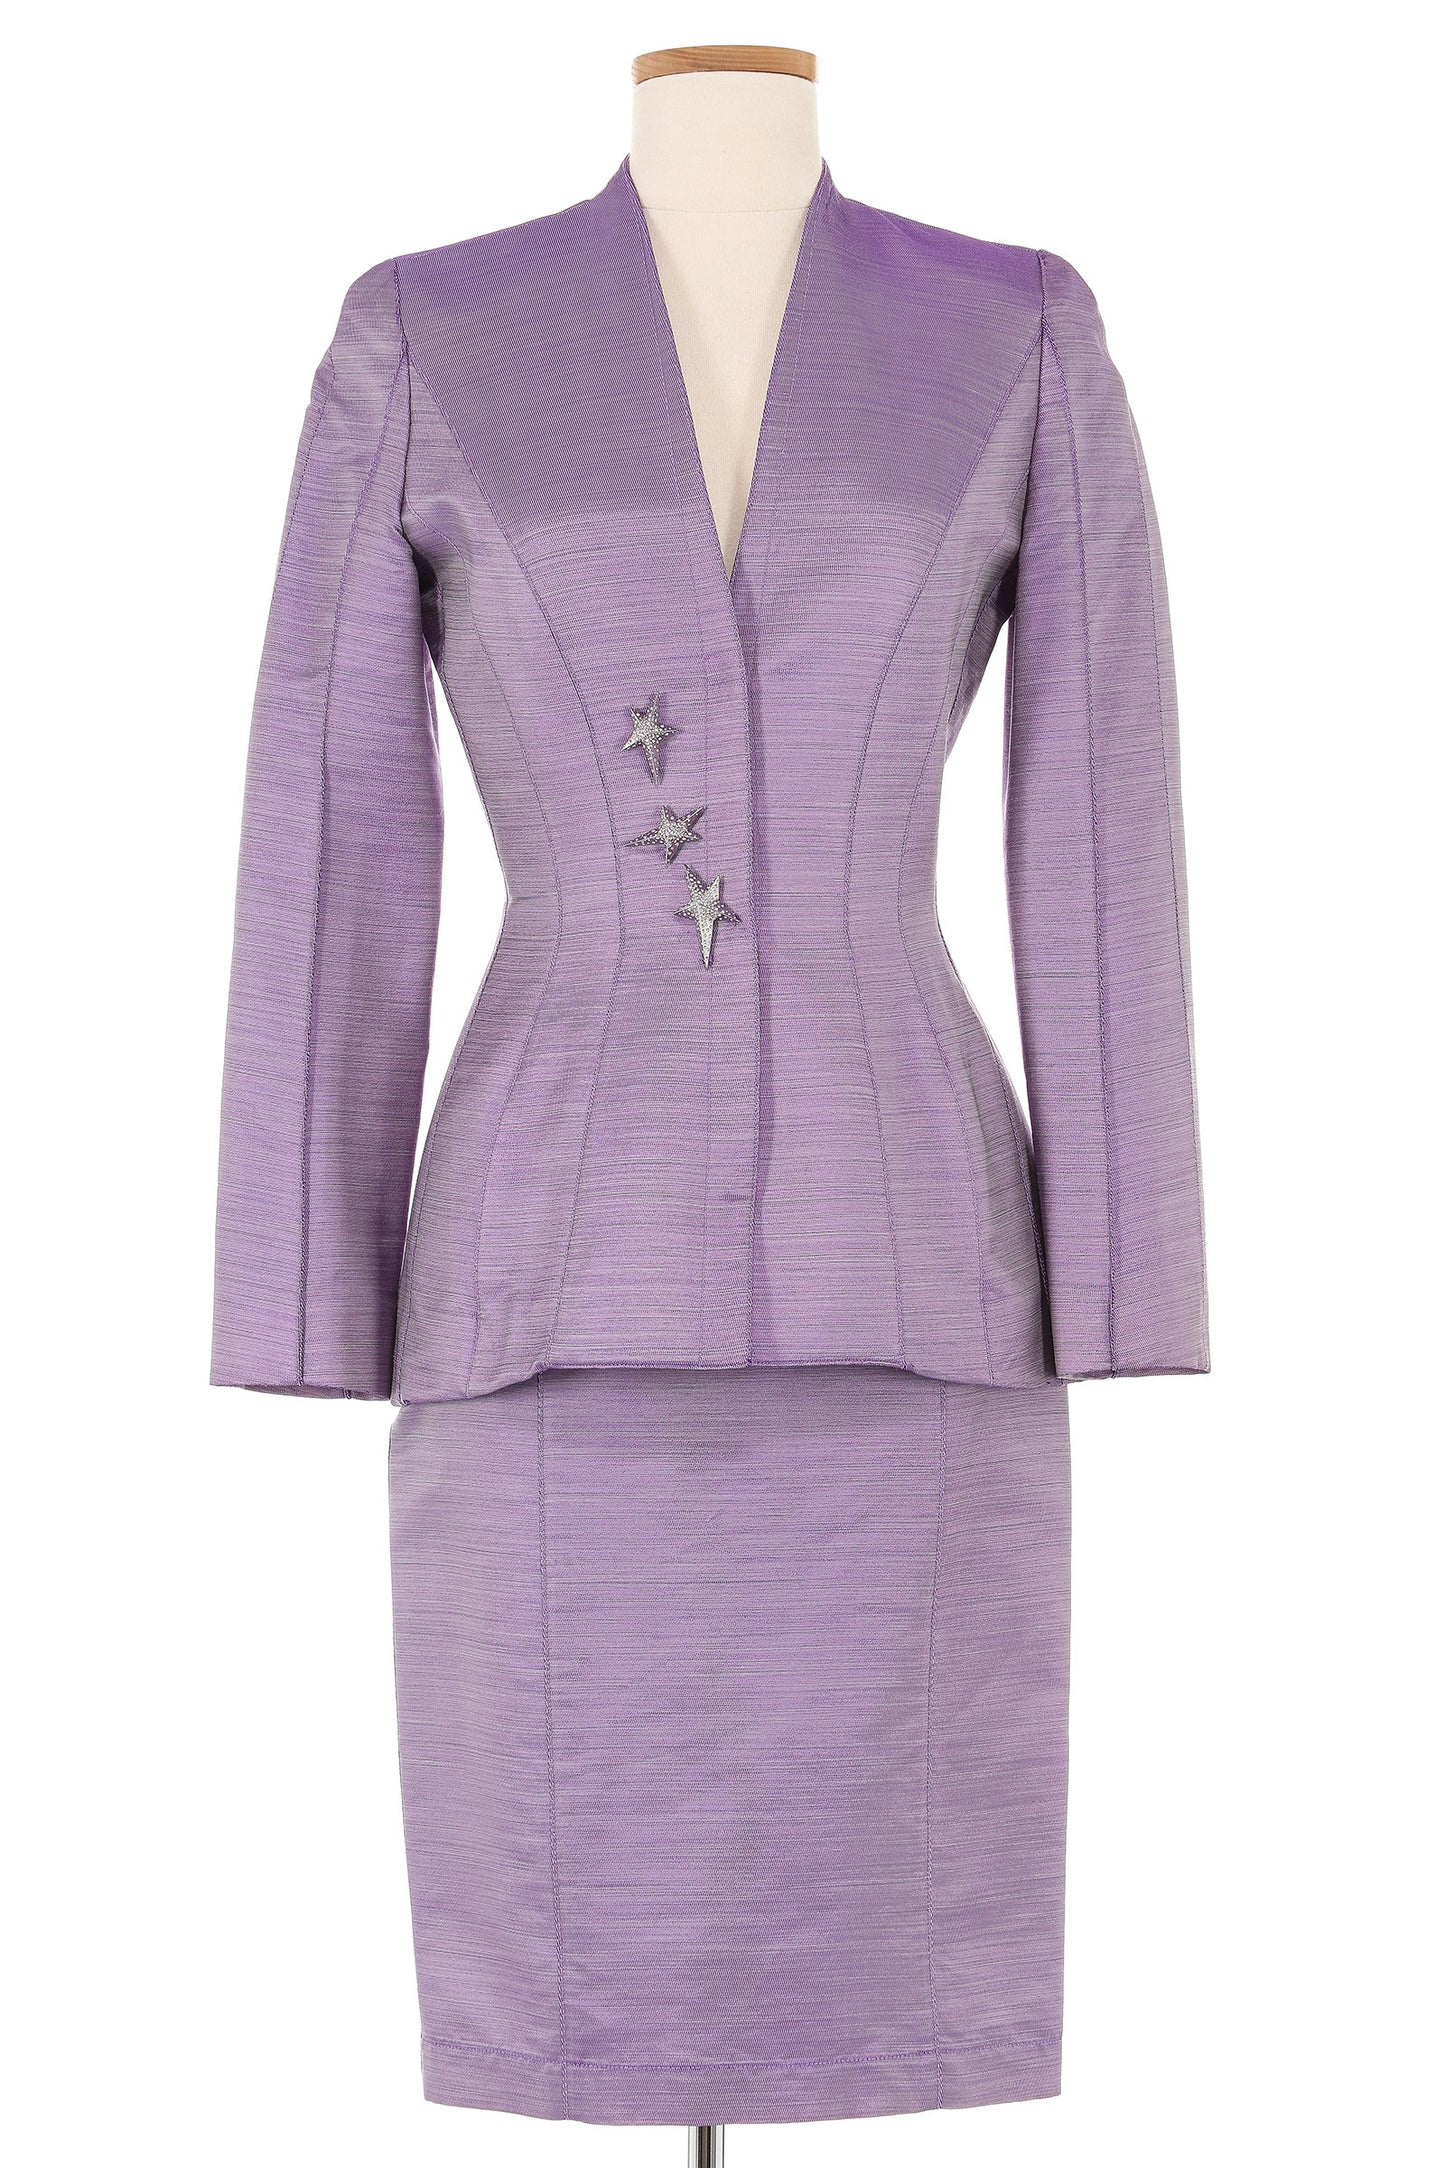 Thierry Mugler 1980's Purple Skirt Suit with Star Buttons